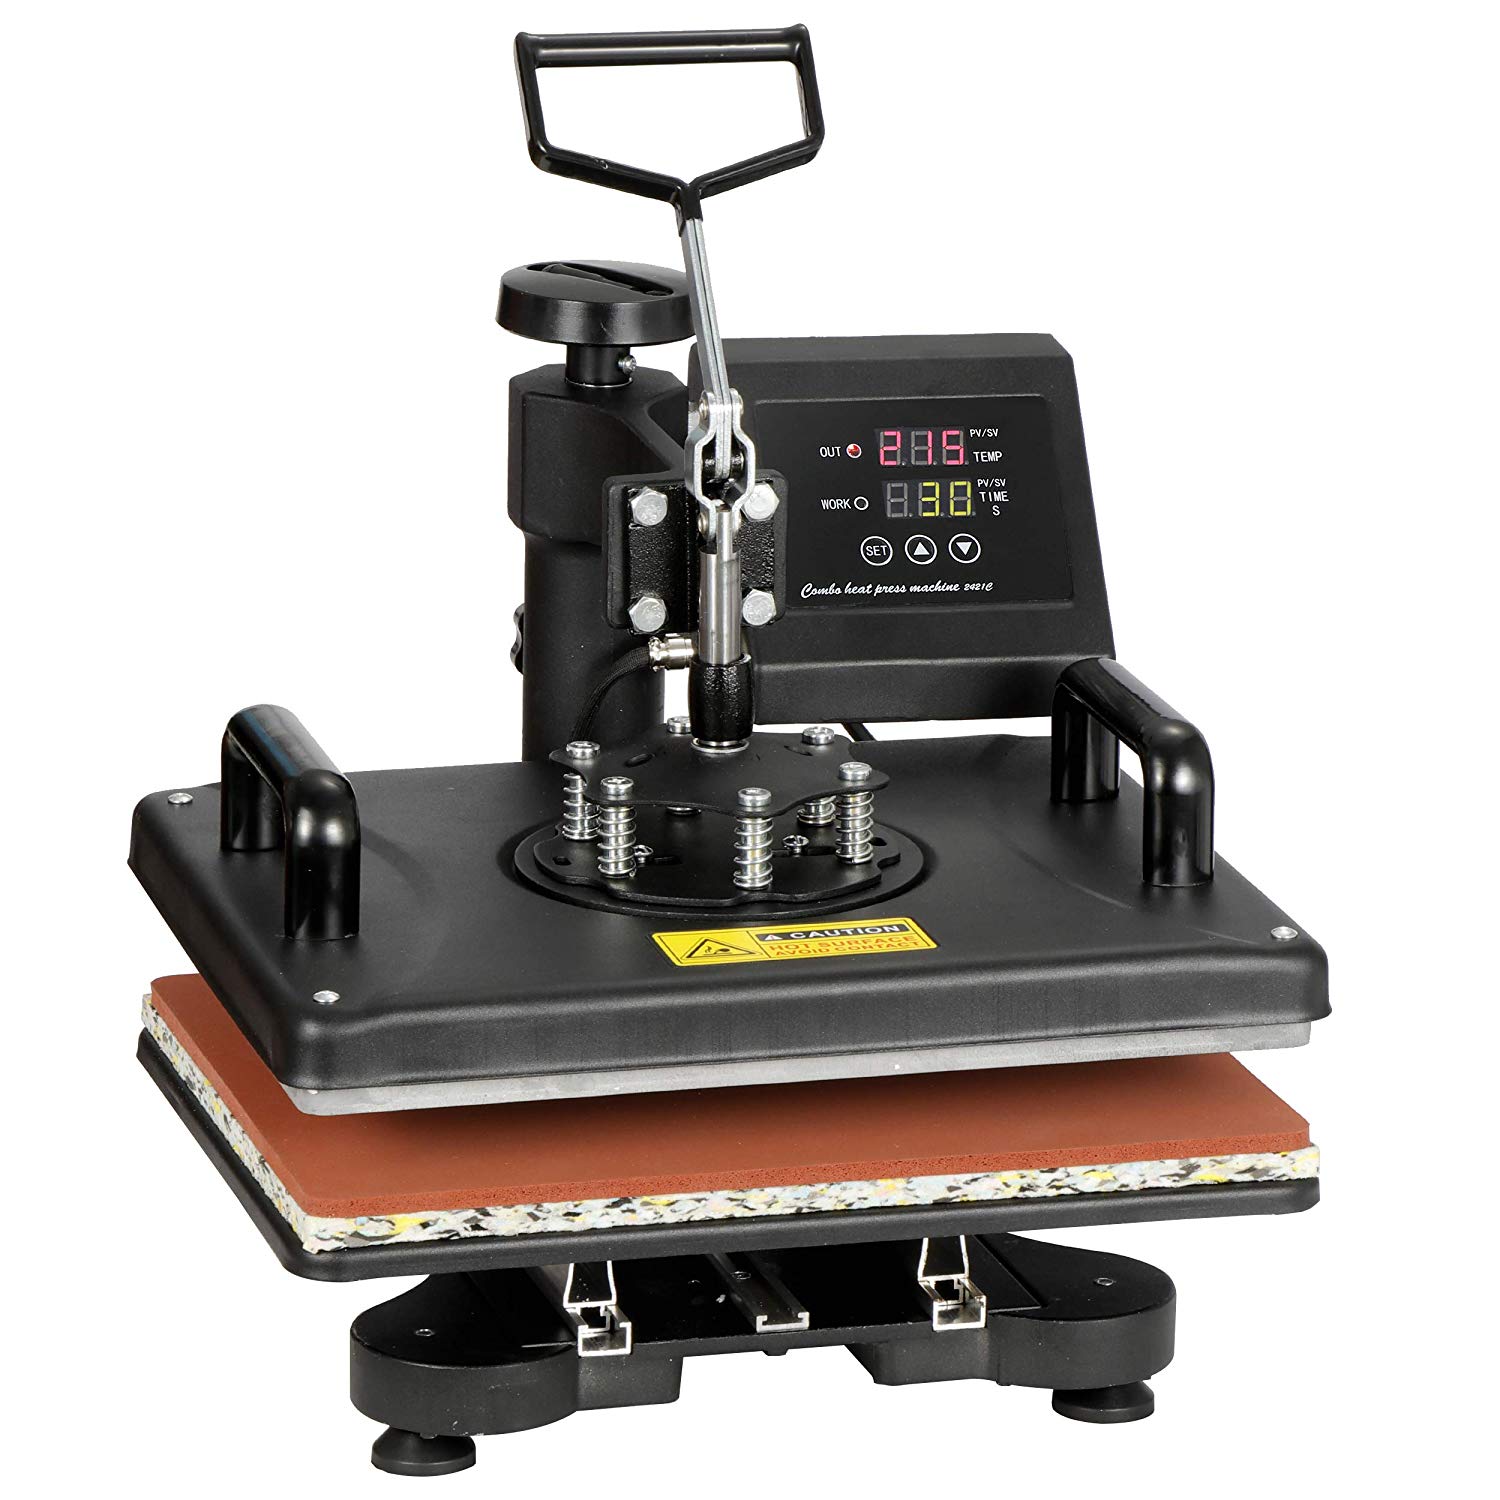 10 Best Heat Press Machines 2020 Reviews & Buying Guide Certain Doubts